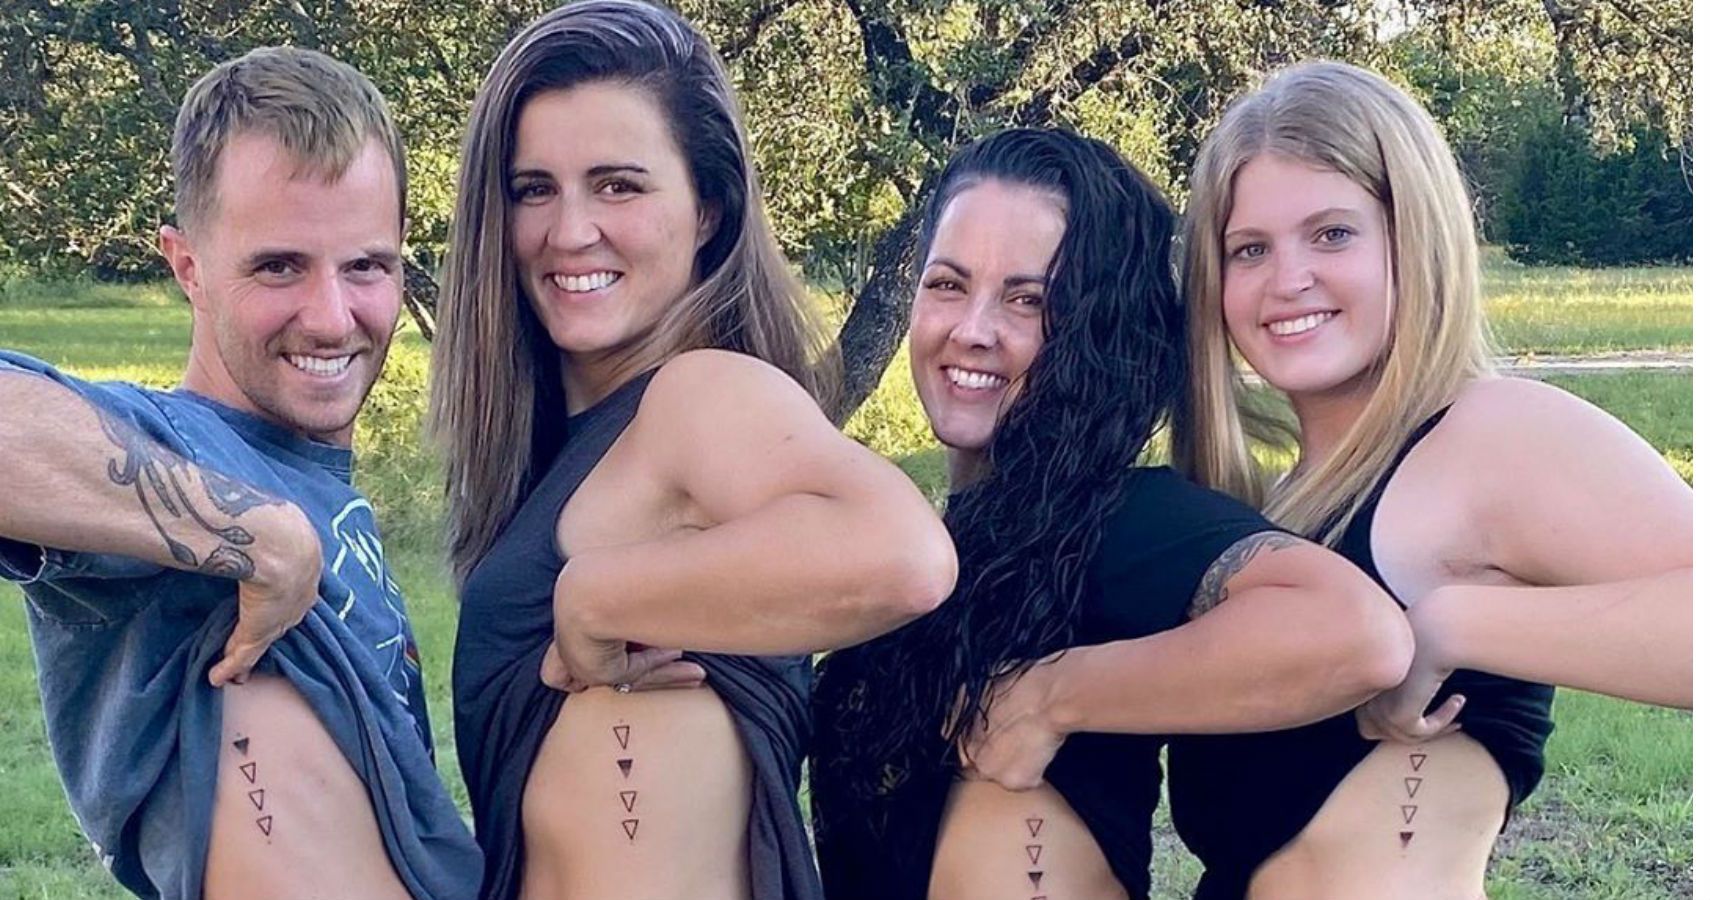 Perfect sibling tattoos don't exi……😏👀 OH, they do exist boys and girls,  just look at those cute #simpsons #siblingtattoos !!!... | Instagram